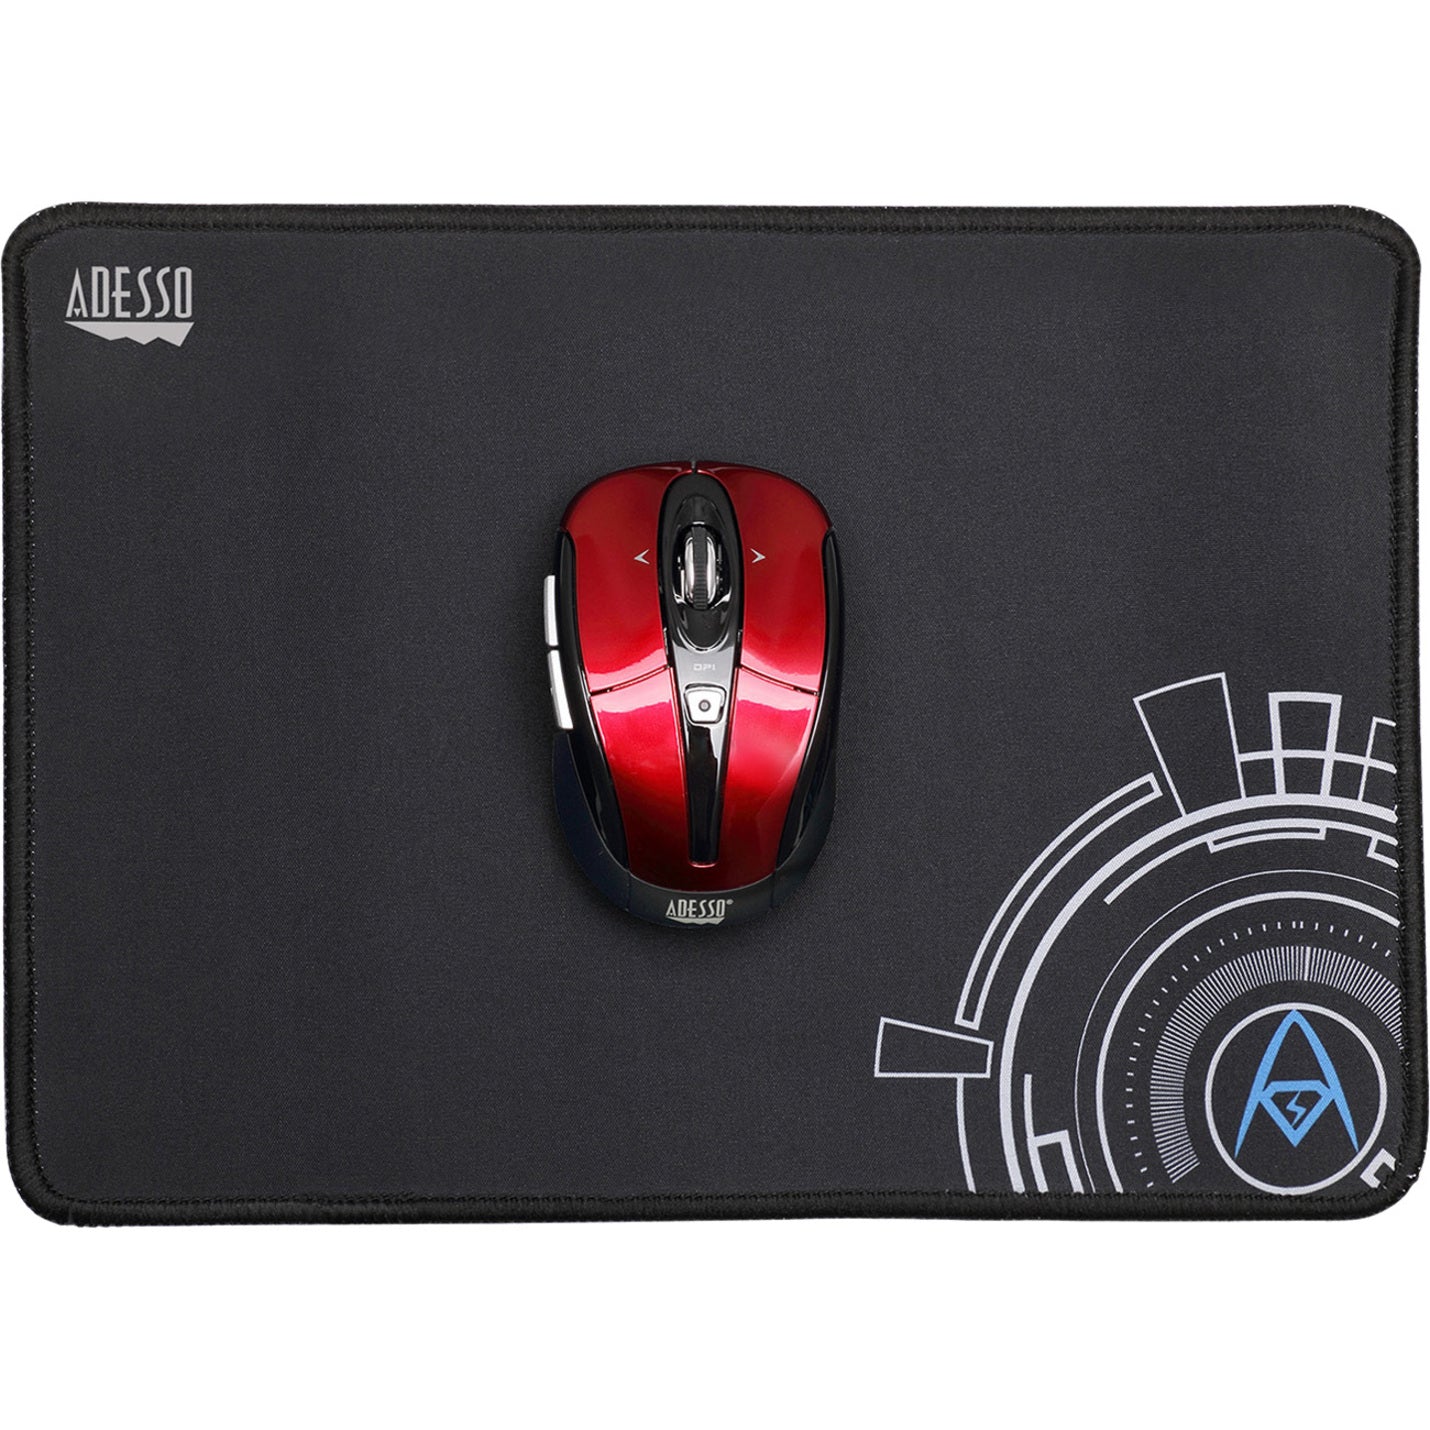 Adesso TRUFORM P102 16 x 12 Inches Gaming Mouse Pad, Peel Resistant, Anti-slip, Scratch Resistant